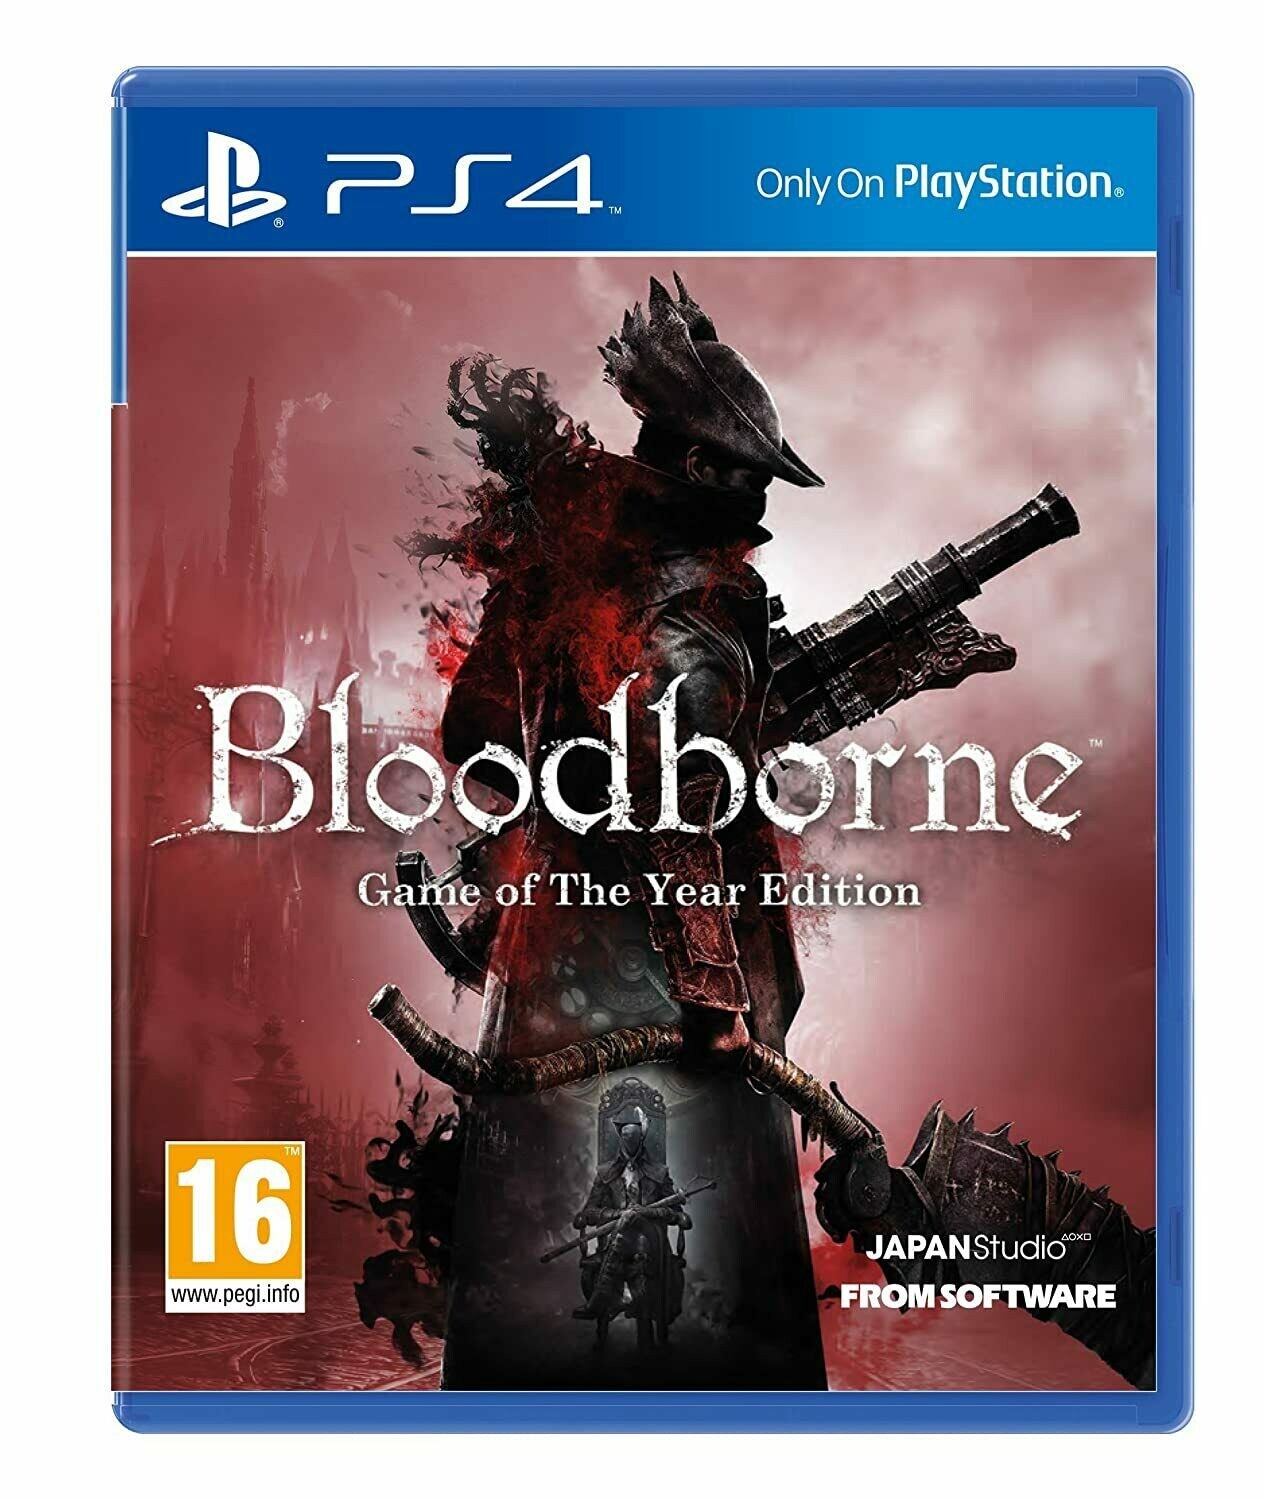 BloodBorne - Game of the Year Edition PS4 - Hardcopy - Brand new & Sealed PS4 Gaming - 1